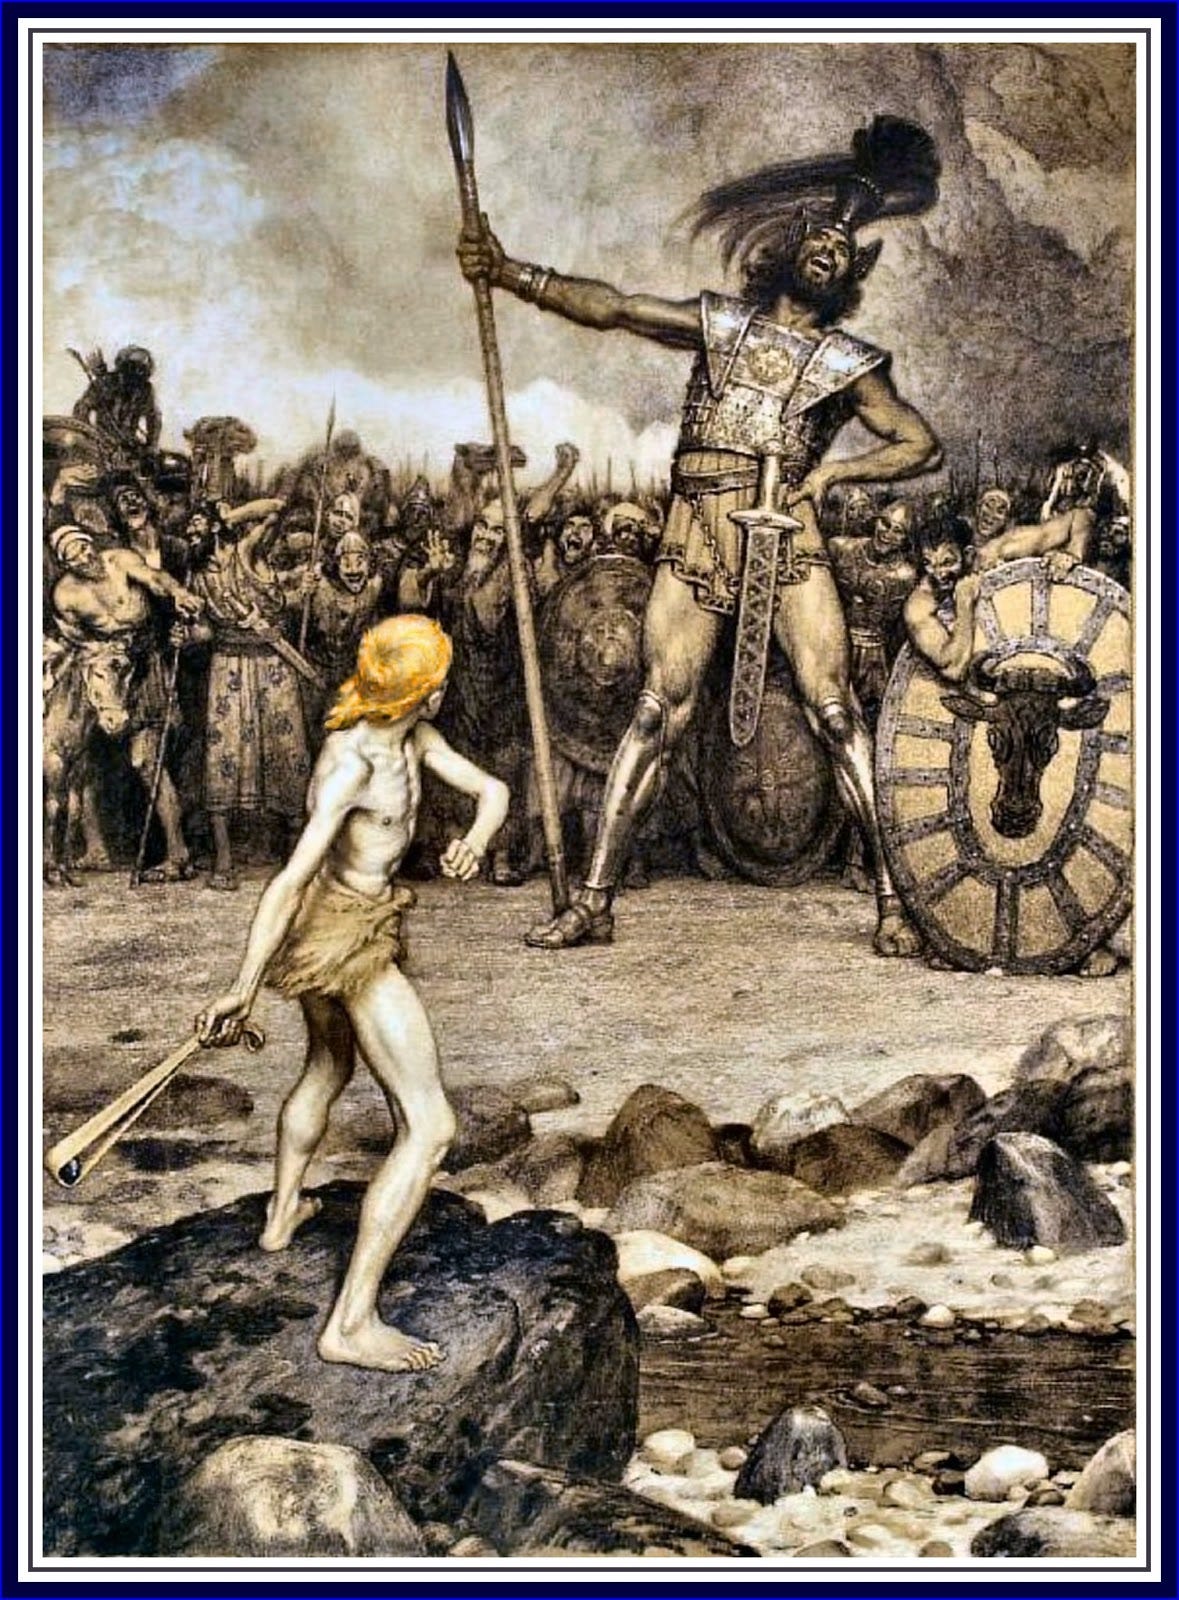 Lithograph of David preparing to sling stones at Goliath.